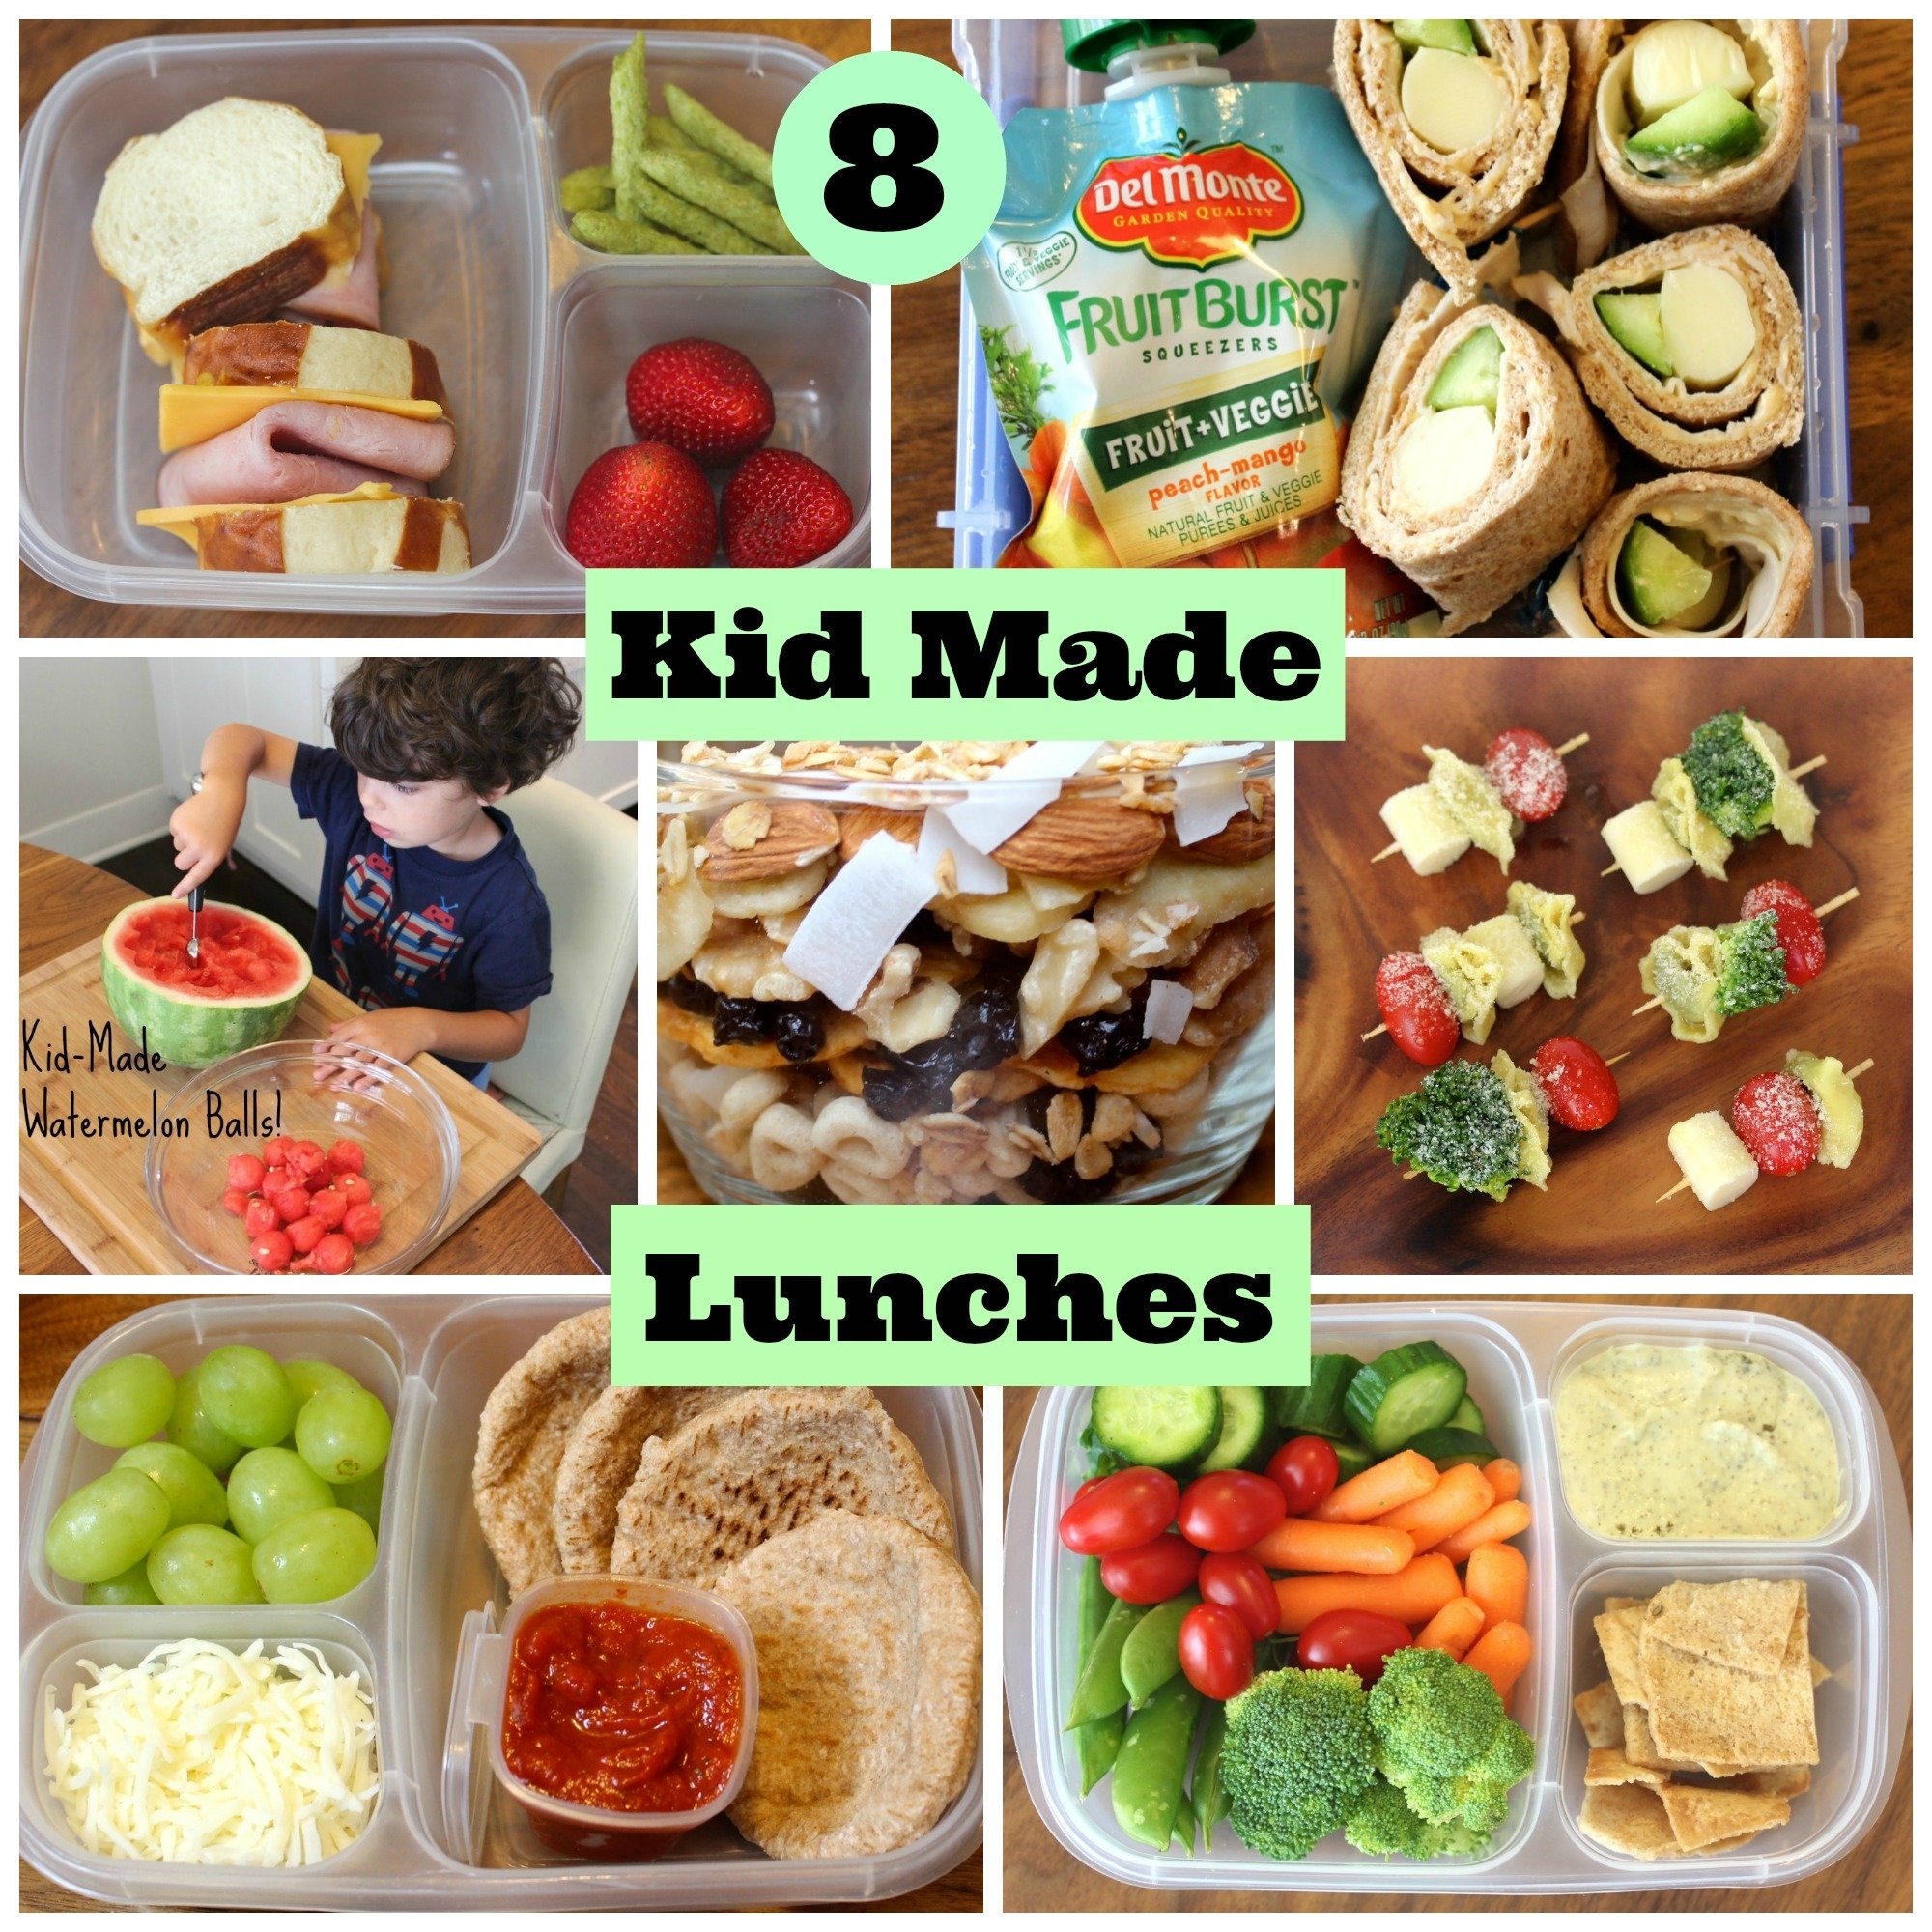 10 Amazing Healthy School Lunch Ideas For Teenagers 4 healthy school lunches your kids can make themselves babble 10 2022